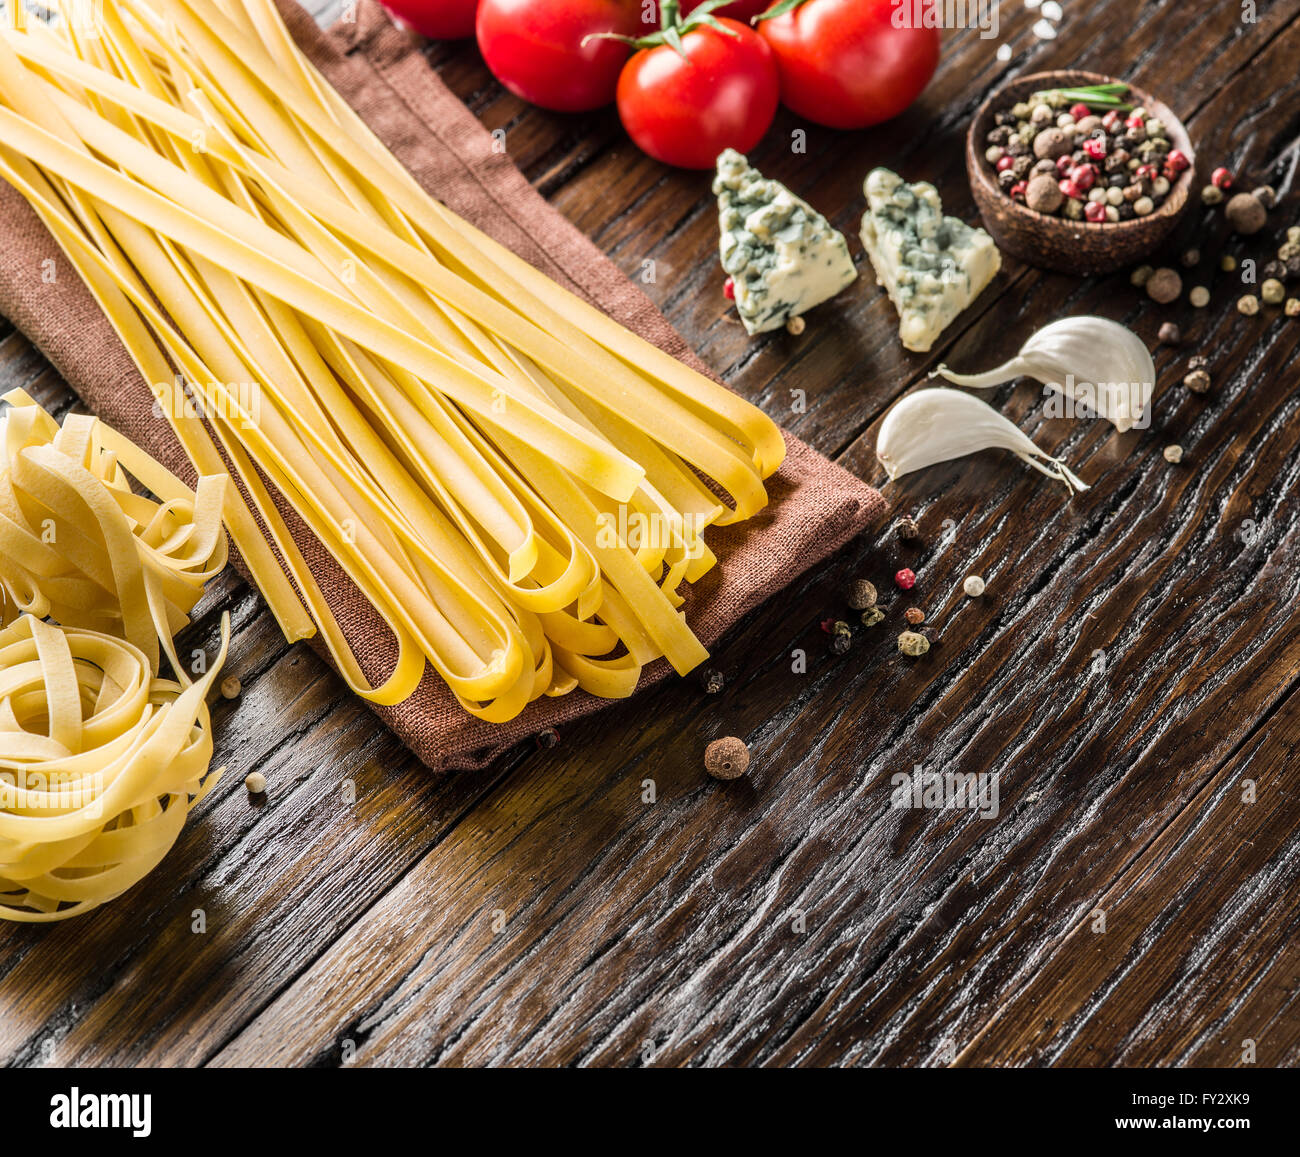 Pasta ingredients. Cherry-tomatoes, spaghetti pasta and blue cheese  on the wooden table. Stock Photo